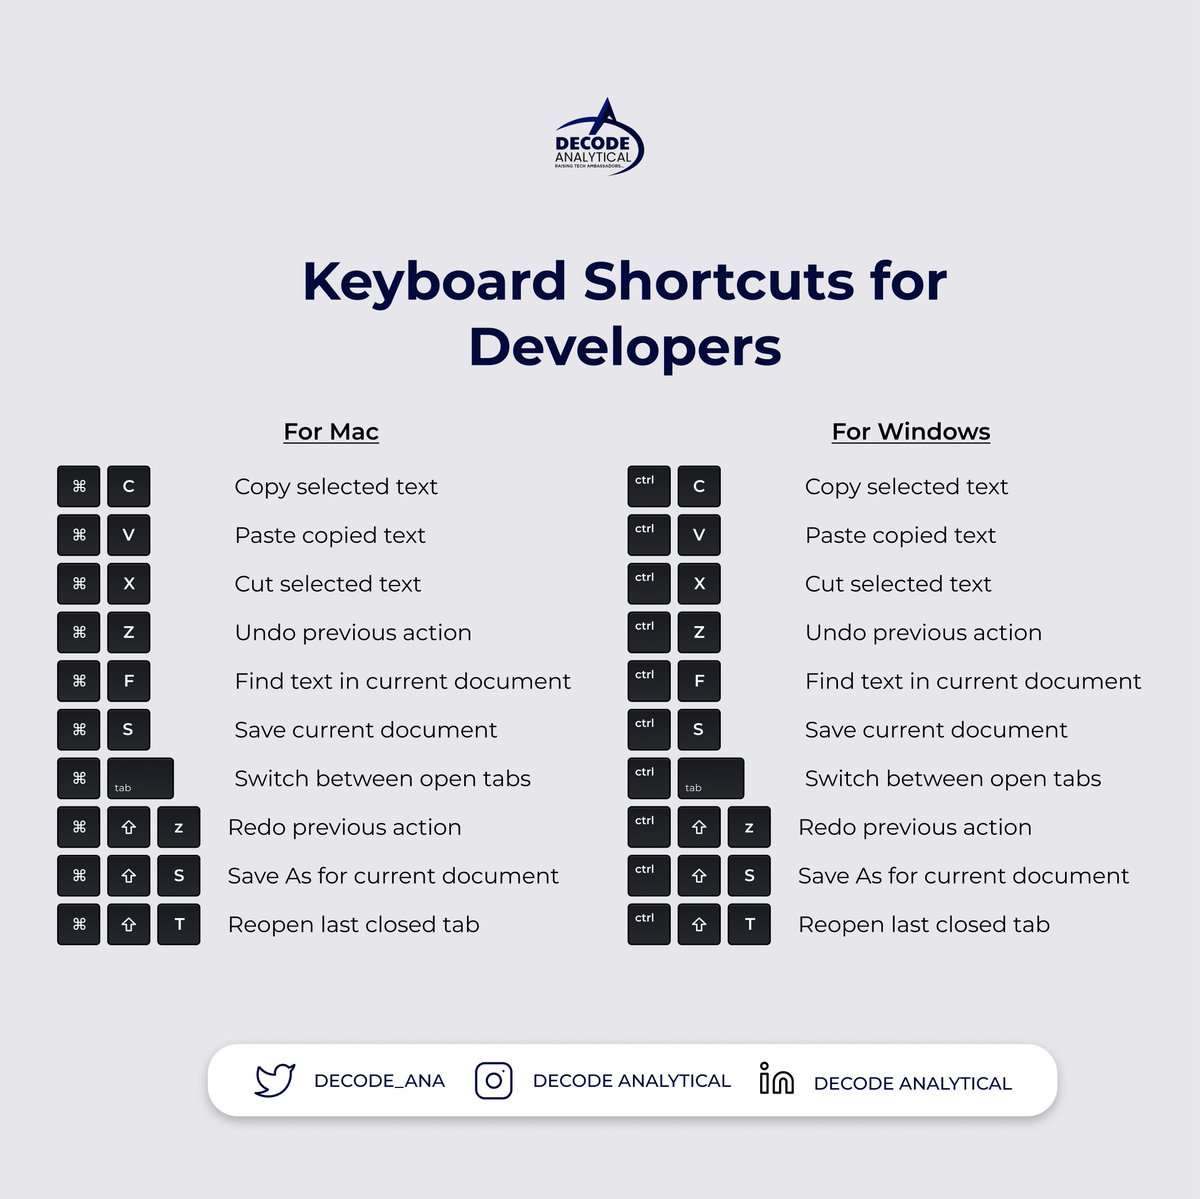 Maximize your productivity as a developer with these keyboard shortcuts. 

#decodeanalytical
#techeducation 
#developertools 
#TechHack
 #DeveloperTips
 #KeyboardShortcuts